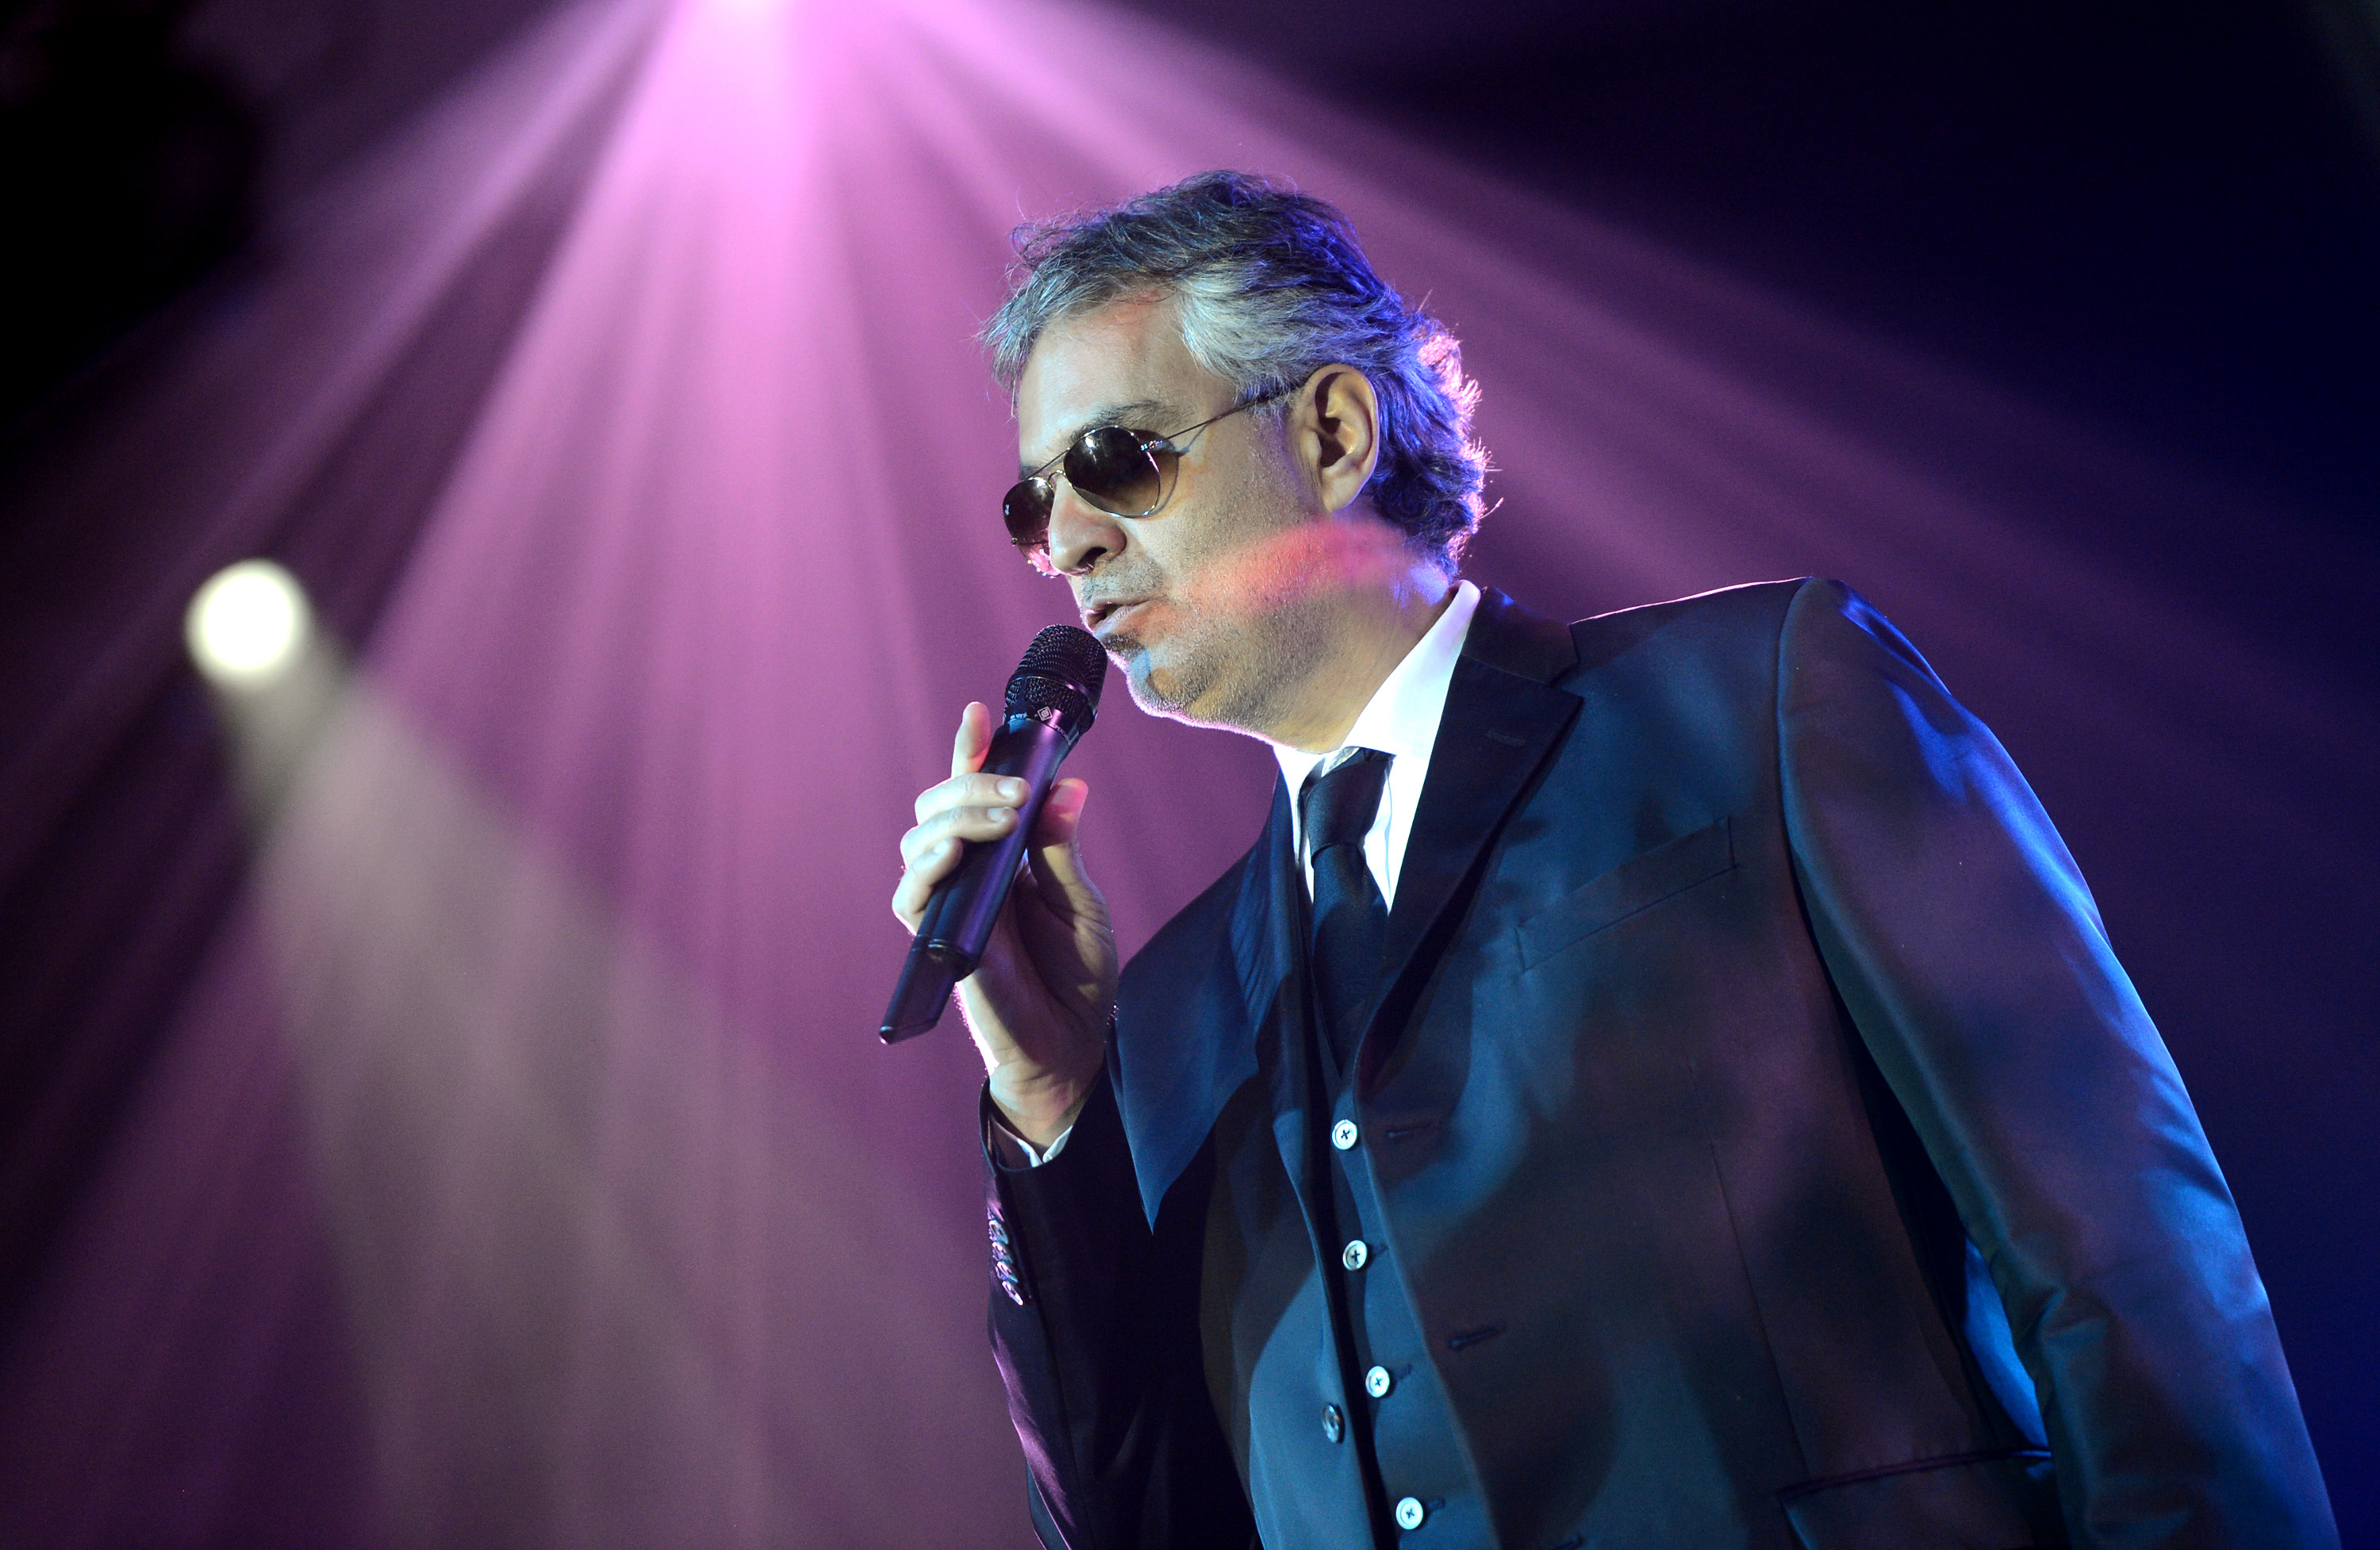 Andrea Bocelli to Cameo in Biopic About Himself – The Hollywood Reporter